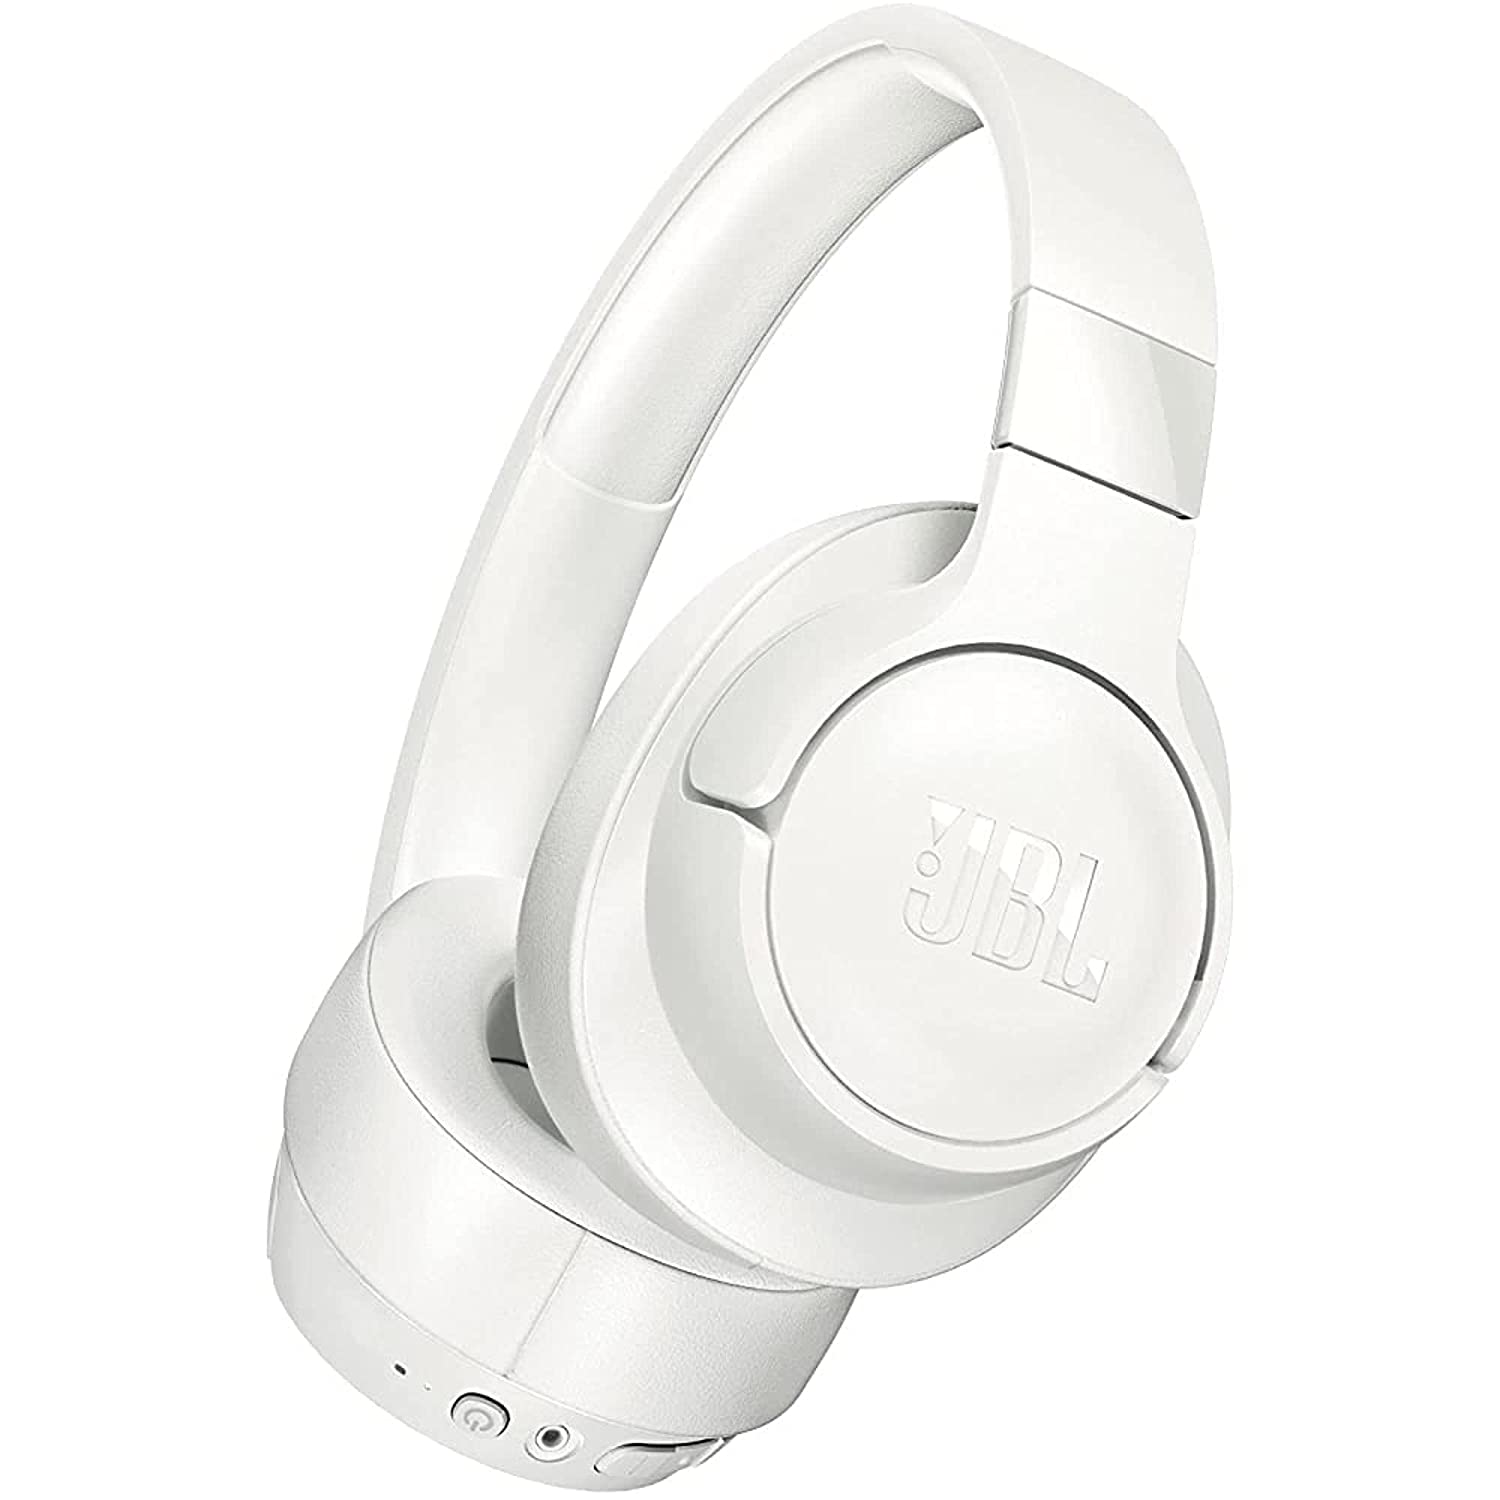 JBL Tune 760NC, Over Ear Active Noise Cancellation Headphones with Mic, up to 50 Hours Playtime, JBL Pure Bass, Google Fast Pair, Dual Pairing, AUX & Voice Assistant Support for Mobile Phones (White)